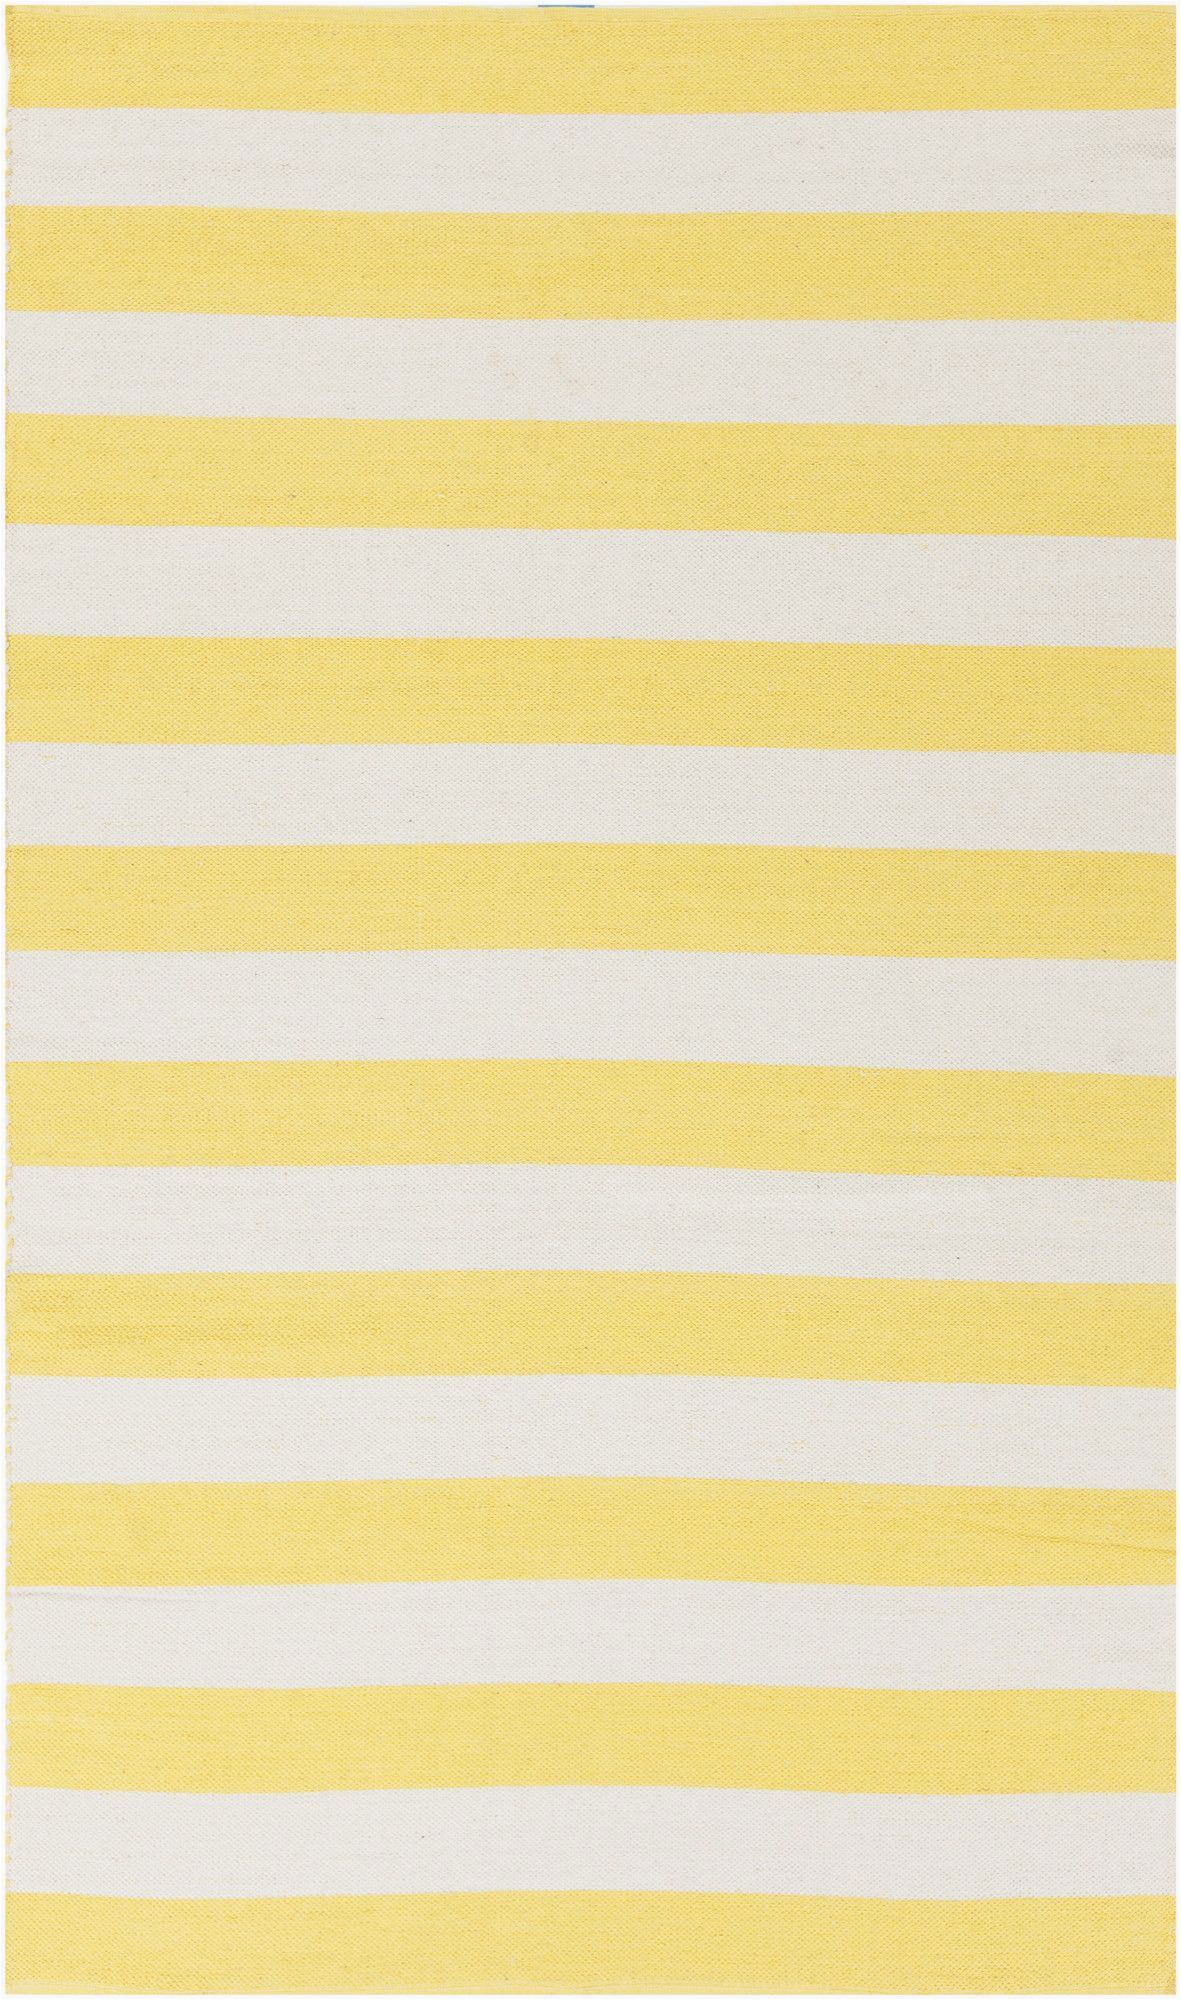 Yellow and White Striped area Rug Sandifer Striped Handwoven Flatweave Cotton Yellow area Rug